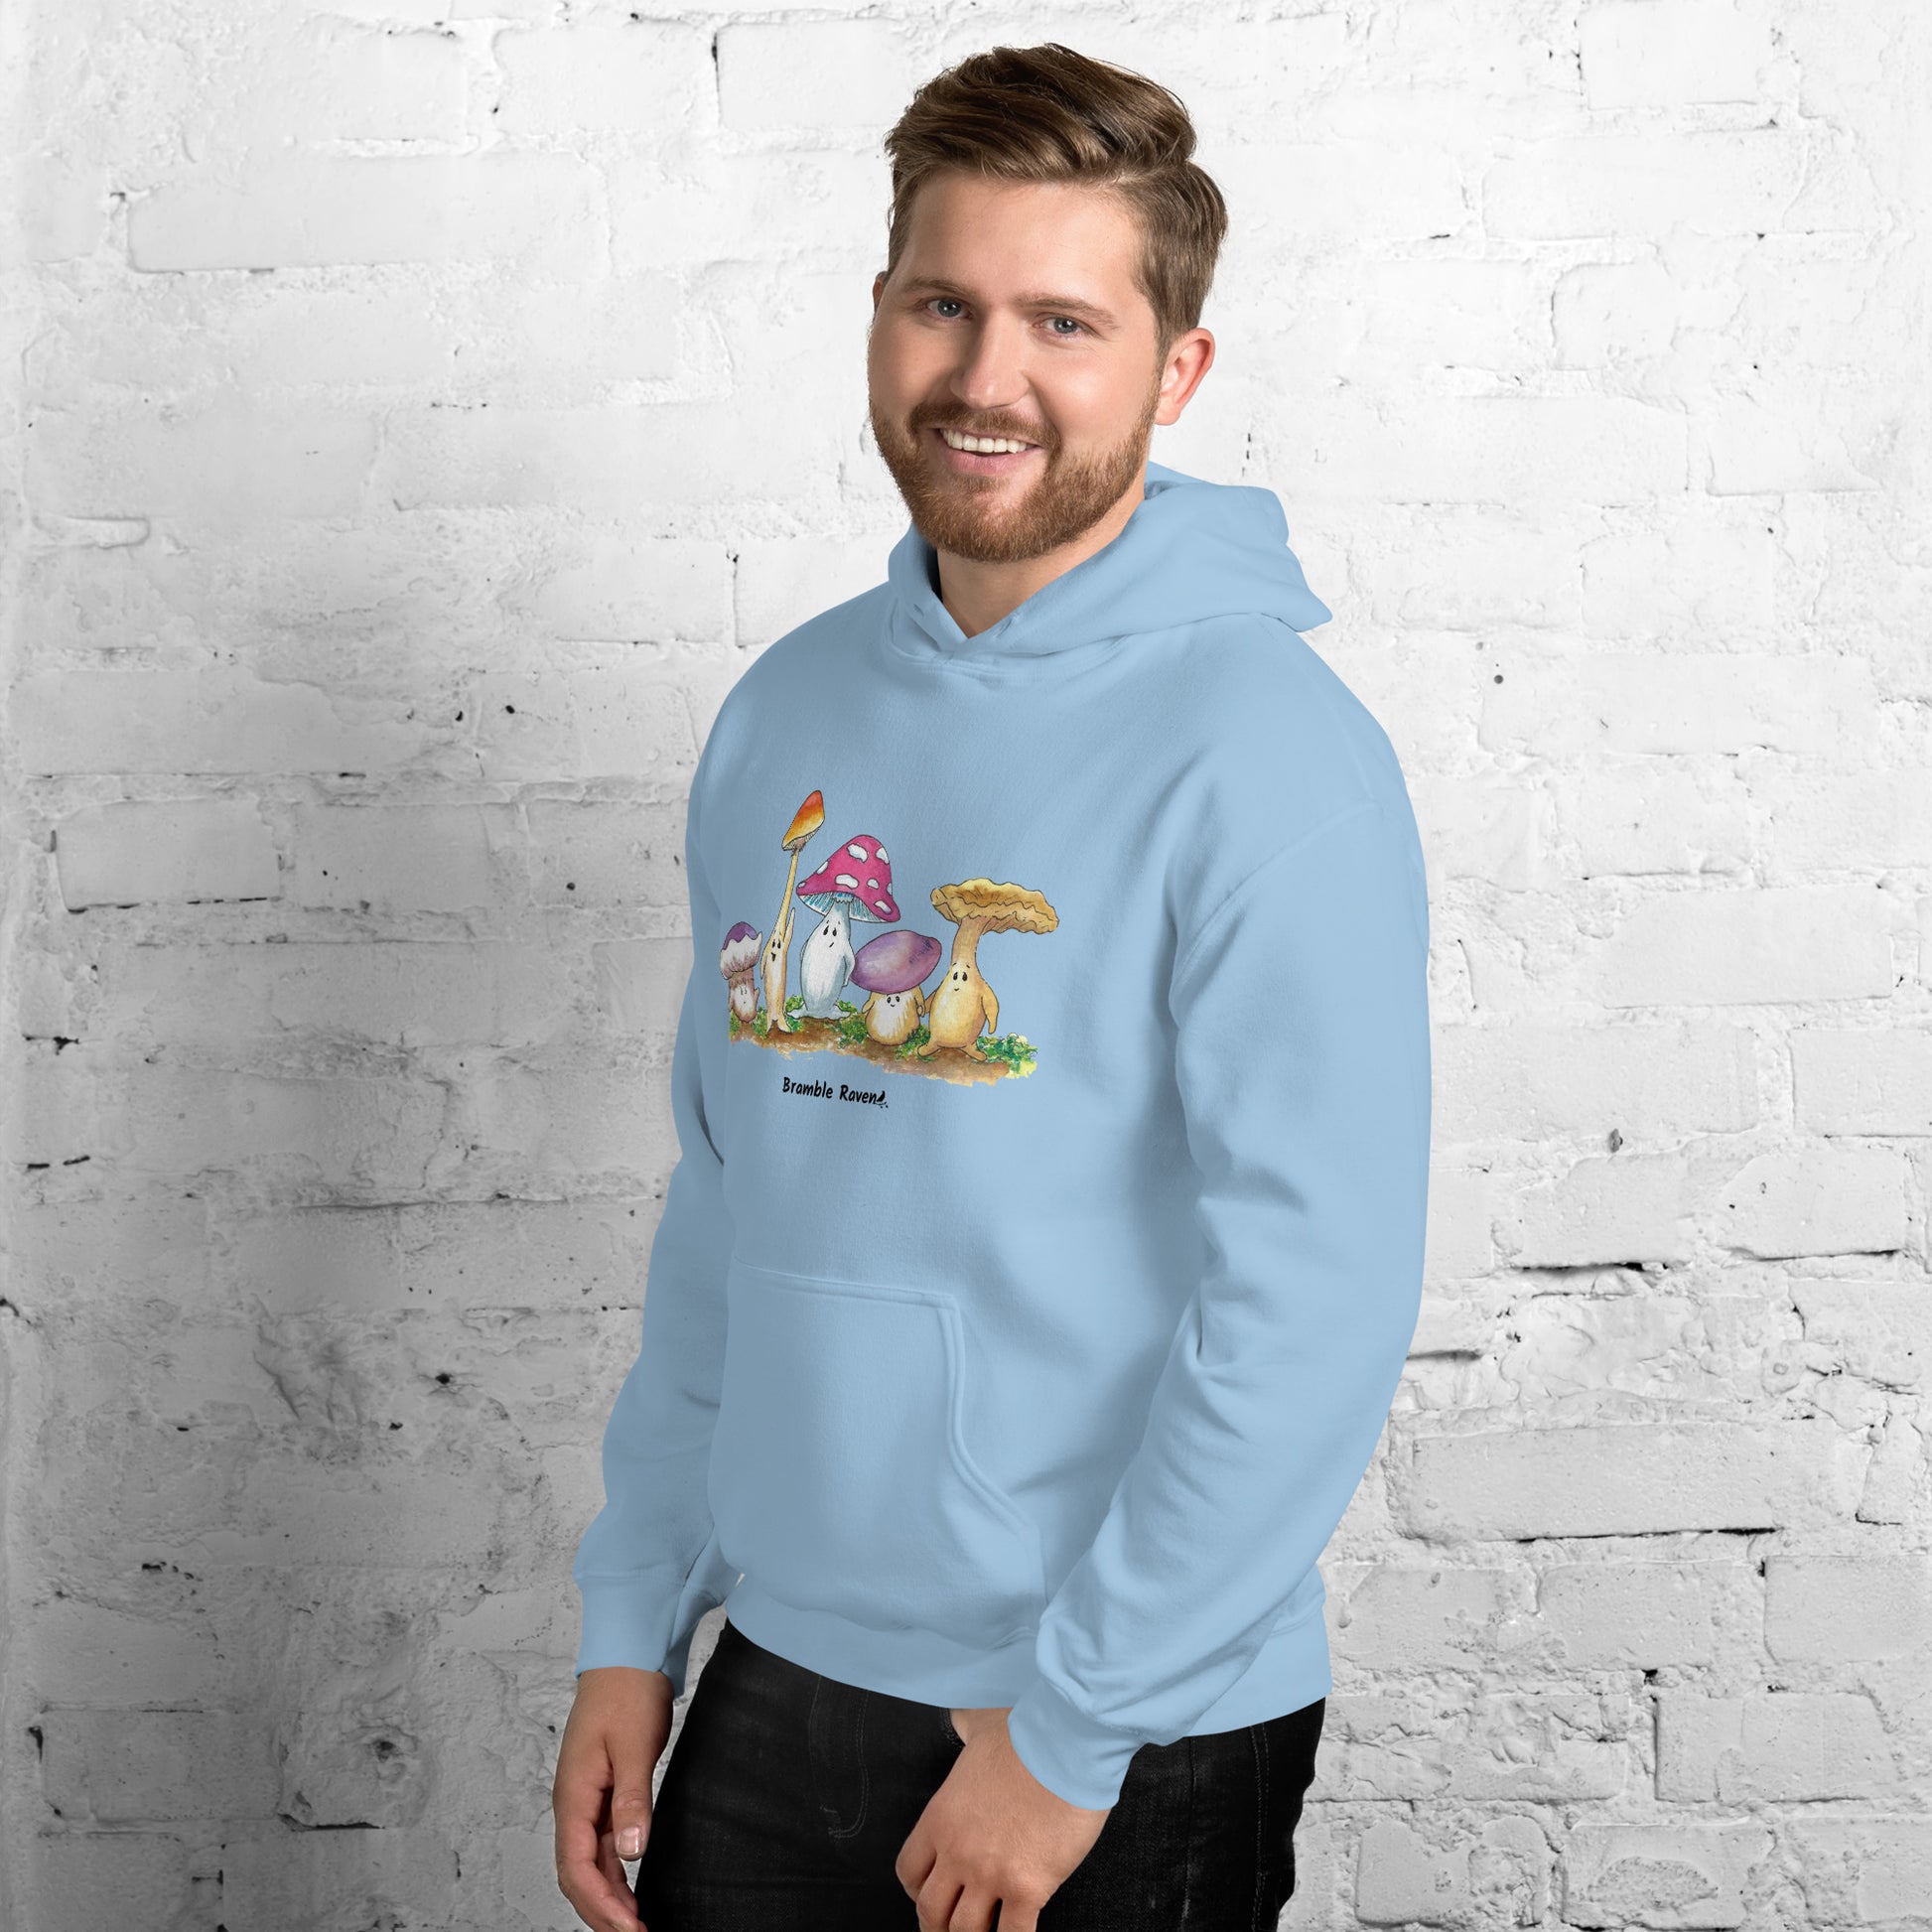 Light blue colored unisex cotton/polyester blend hoodie. Features front design of Mushy and his whimsical mushroom friends. Hoodie has double lined hood, front pouch pocket, rib knit cuffs and stretchy waistband. Shown on male model facing left.